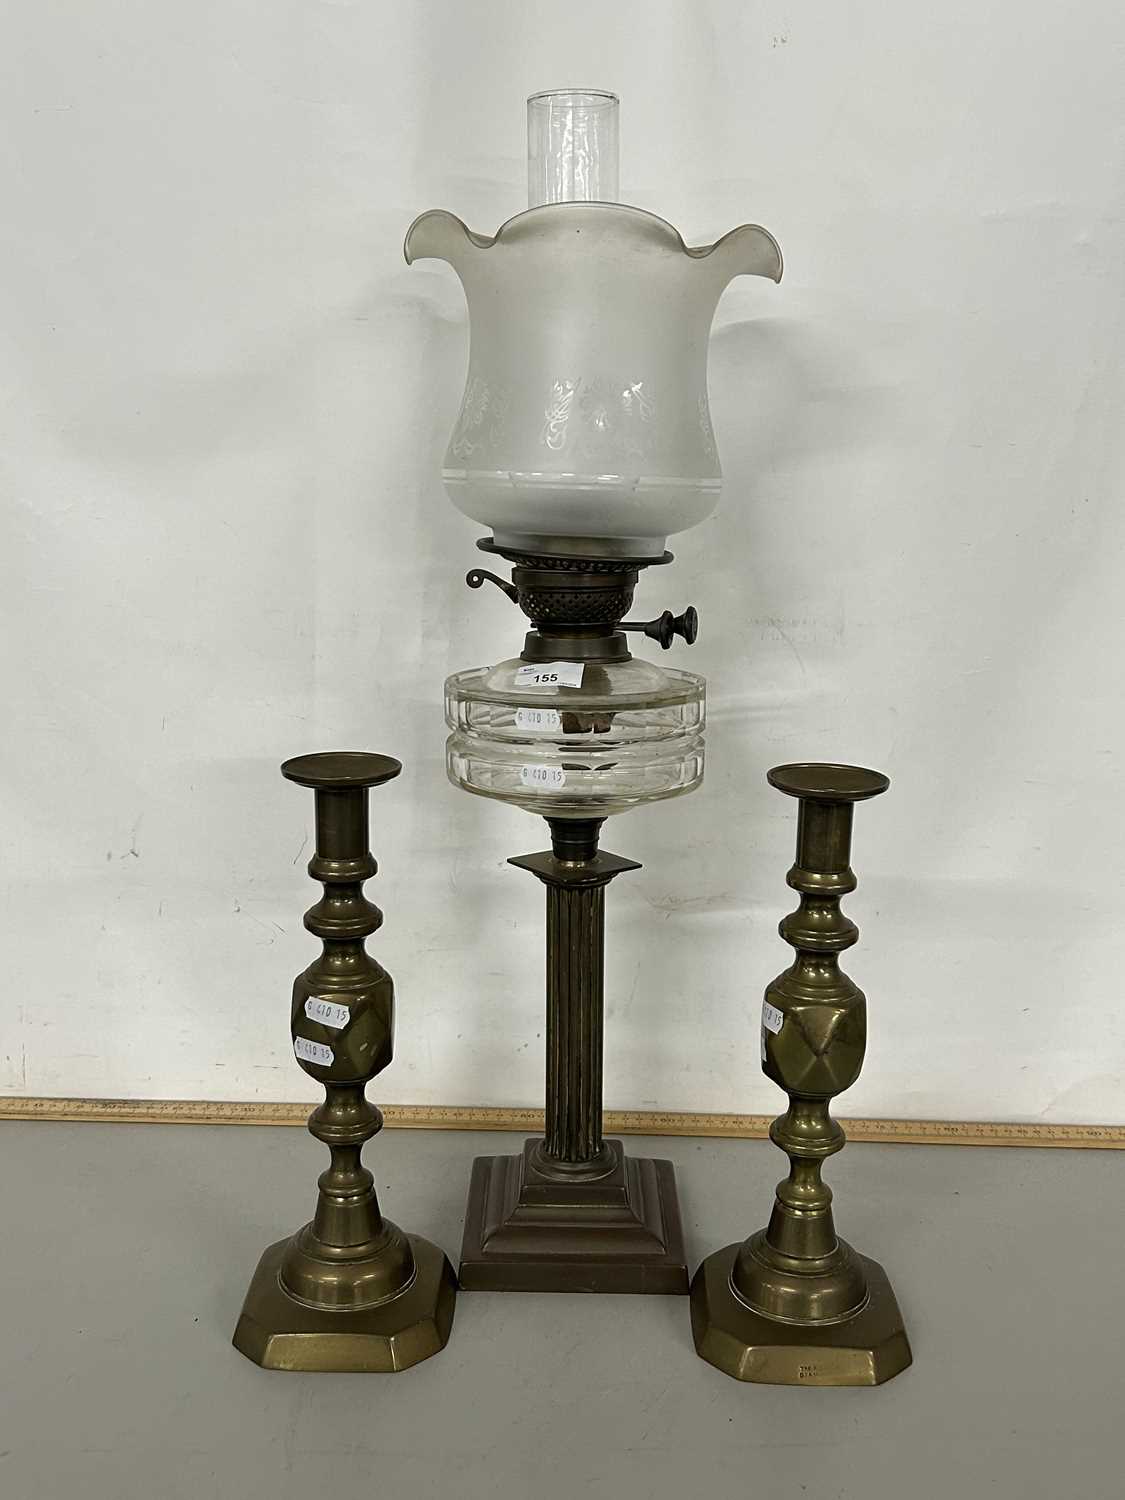 Brass based oil lamp and a pair of brass candlesticks